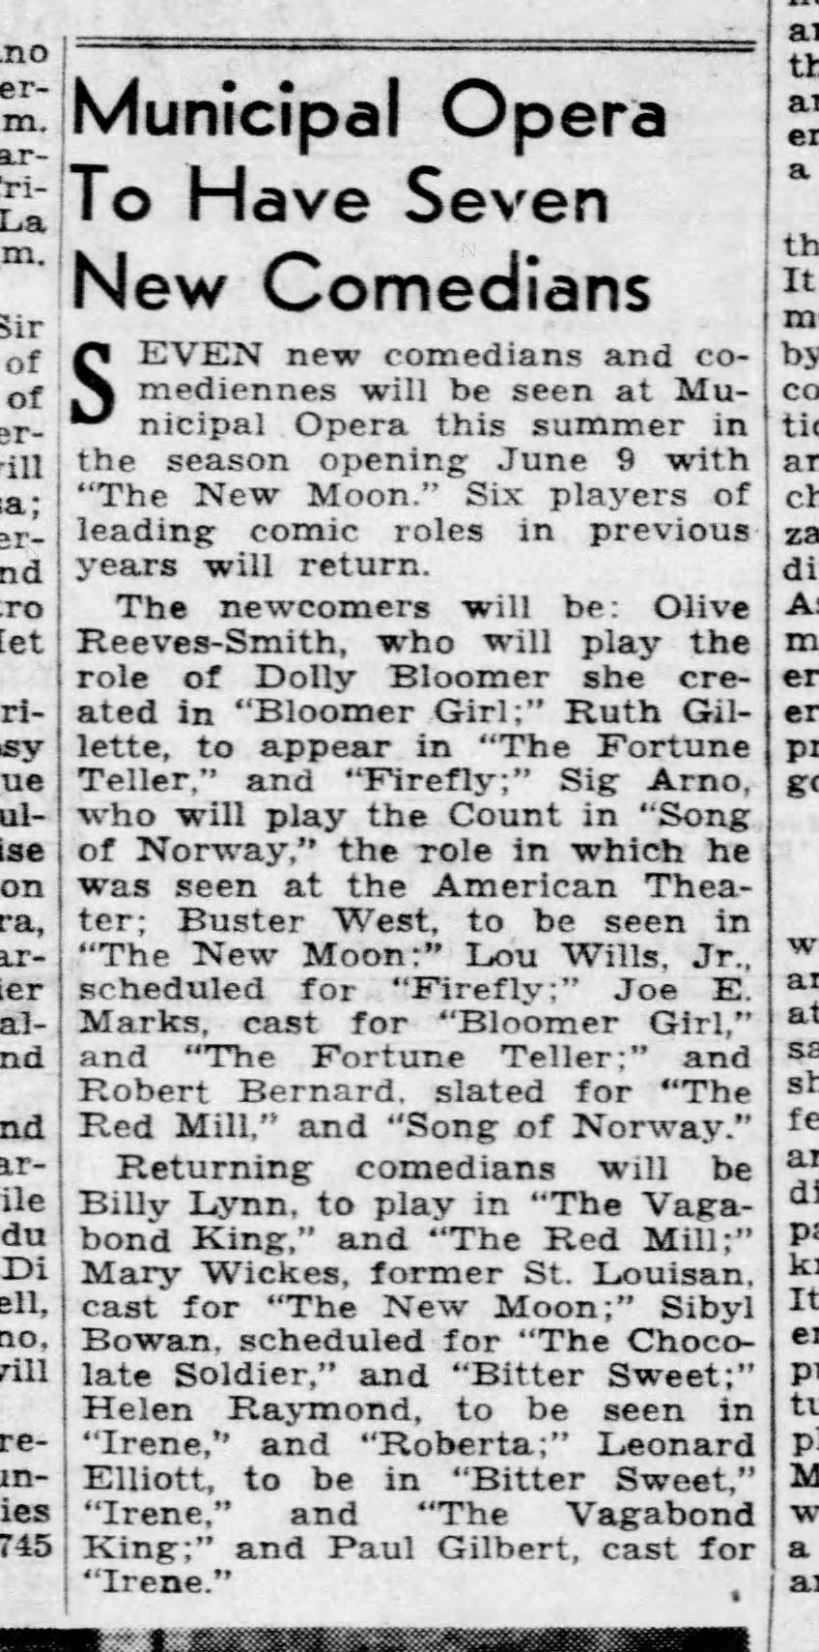 1949_Municipal Opera To Have Seven New Comedians